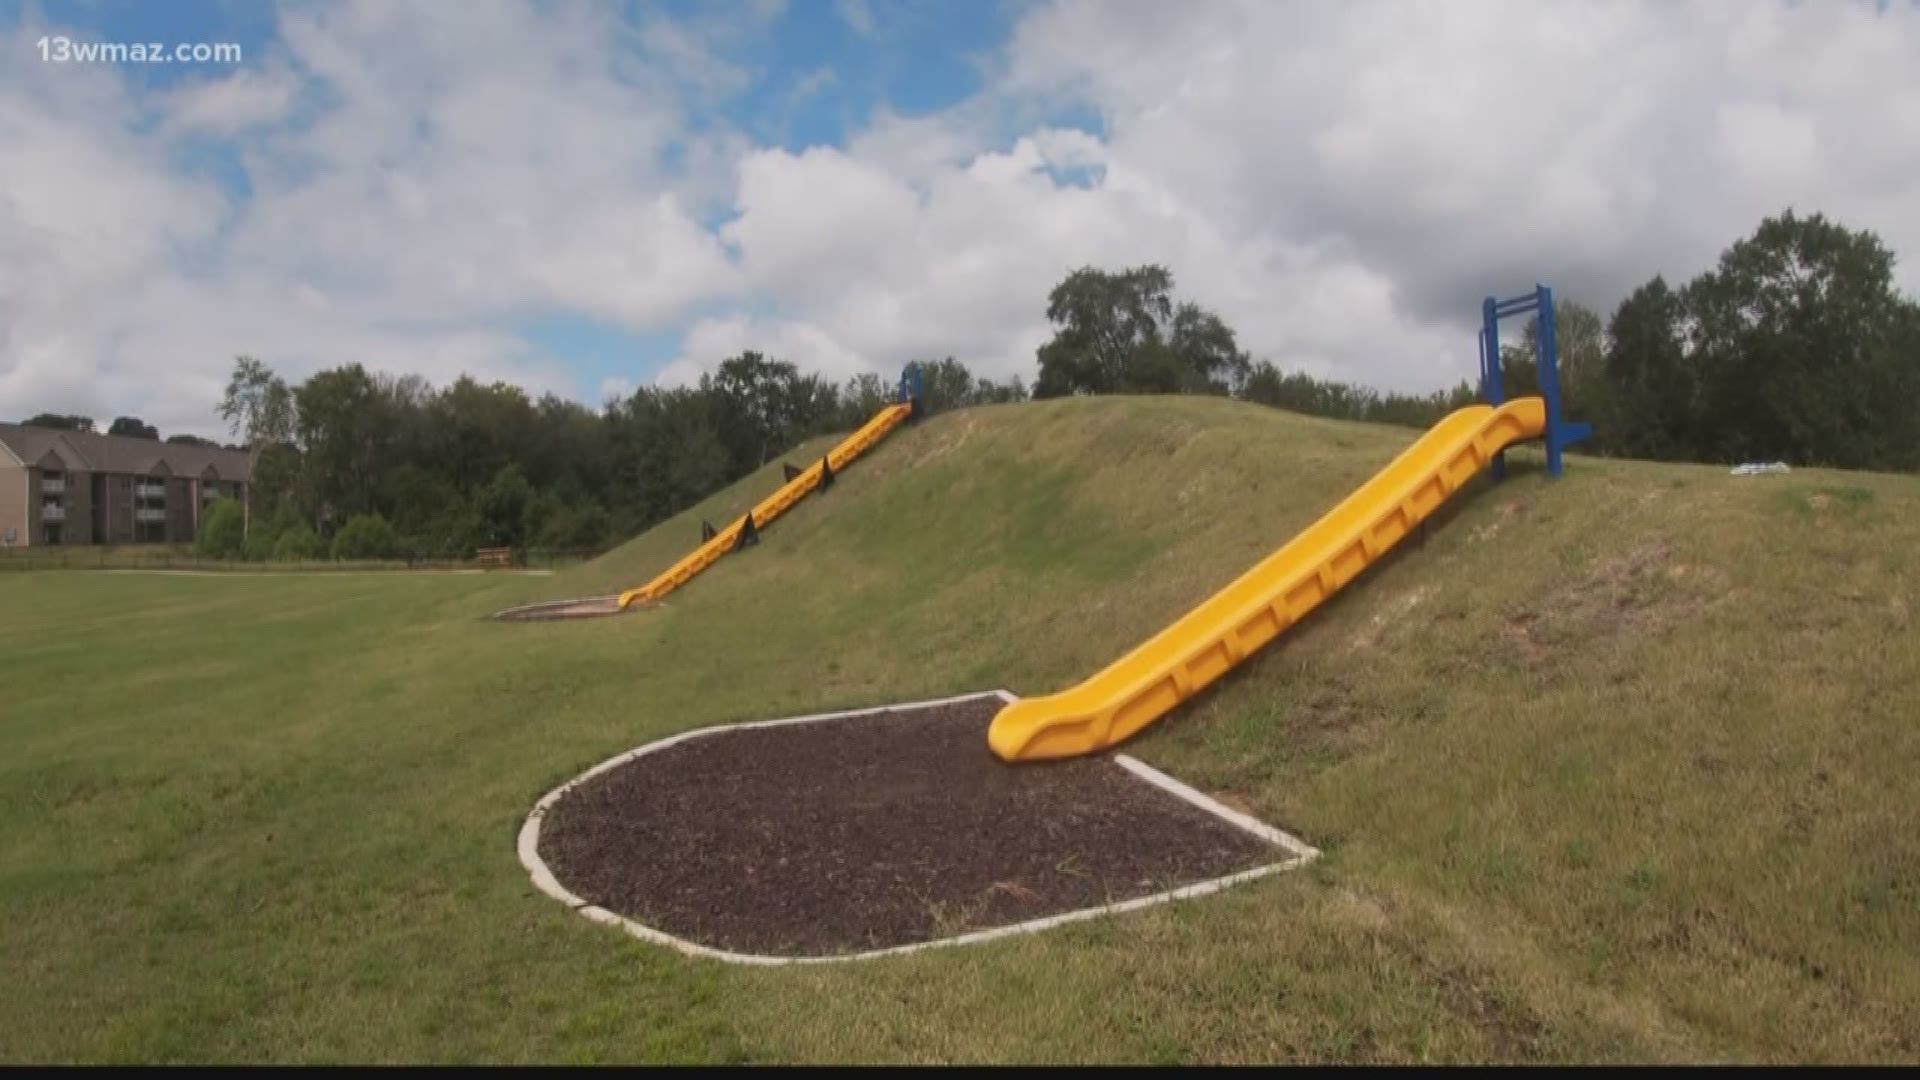 Folks in Warner Robins will have a new place to go outside and get a little exercise starting next week. Sarah Hammond tells us about the new walking trail and outdoor space.